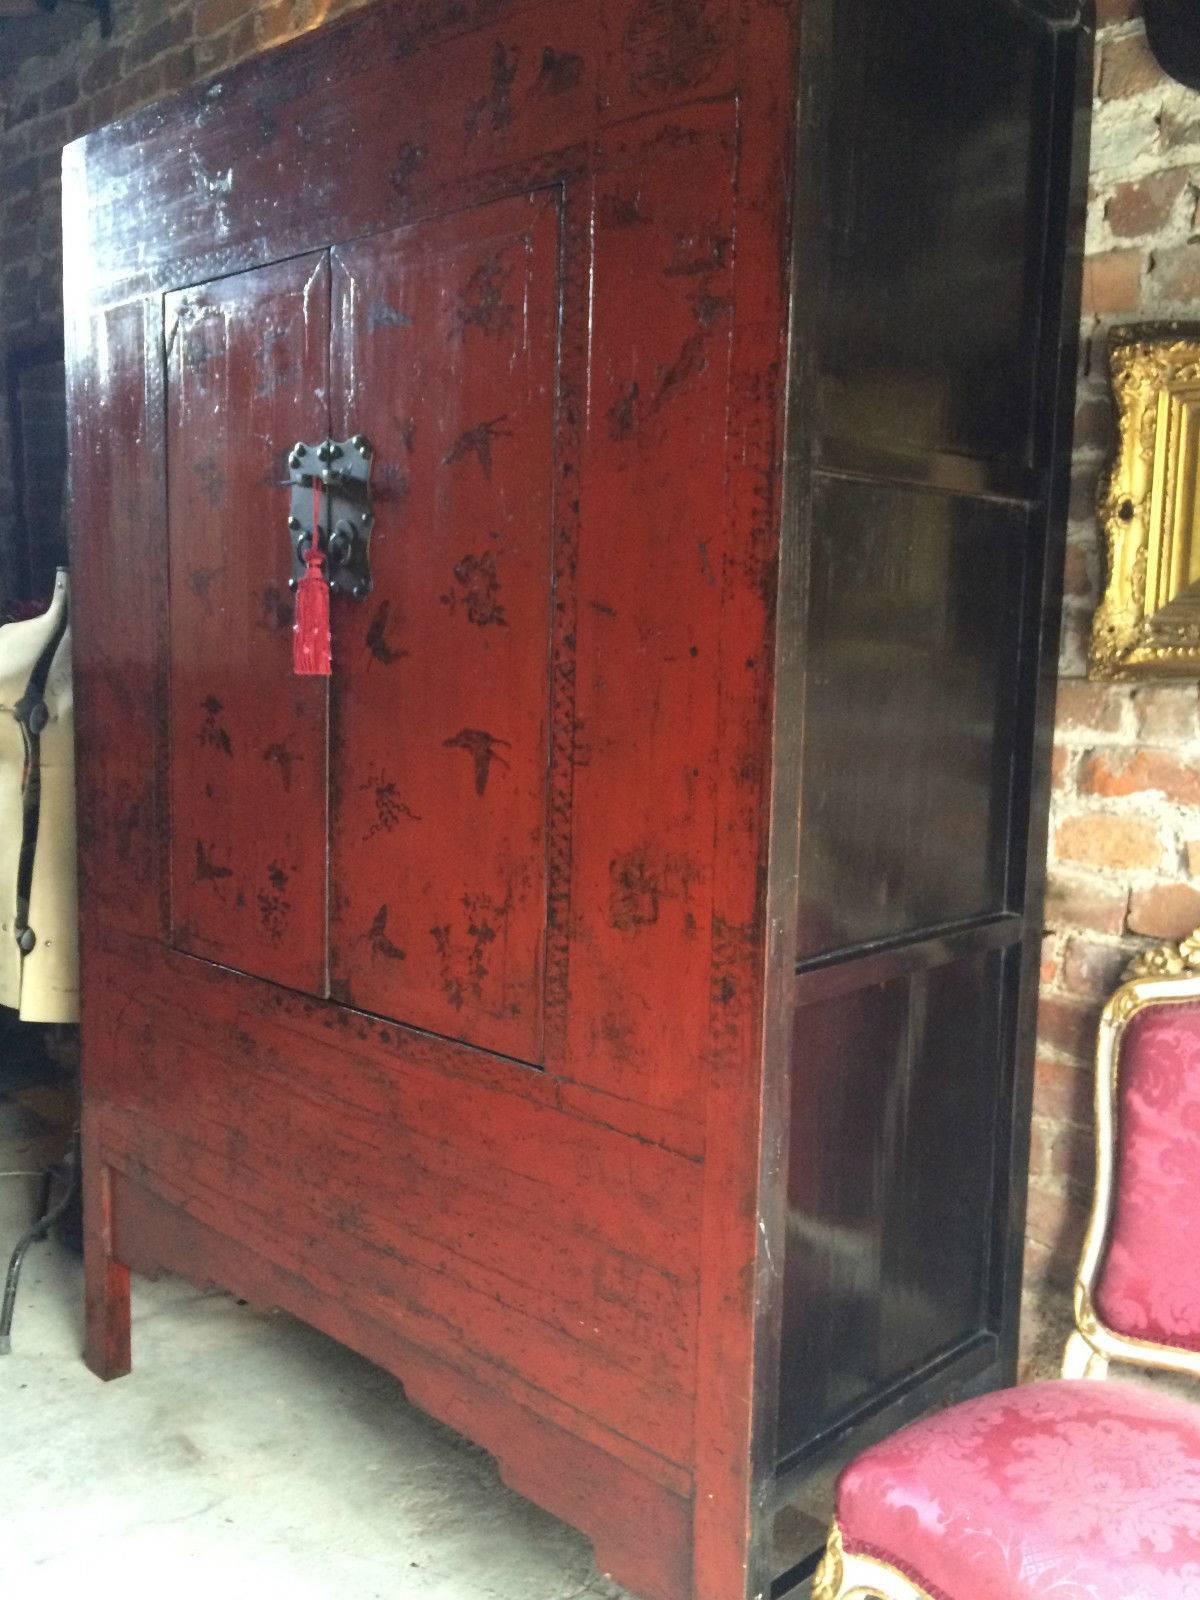 Antique 19th century elm Chinese lacquered Chinoiserie two-door wardrobe armoire, circa 1899 from the Shanxi region of China, decorated in red lacquer with flowers and butterflies, two cupboard doors with heavy large brass metalwork to front, two